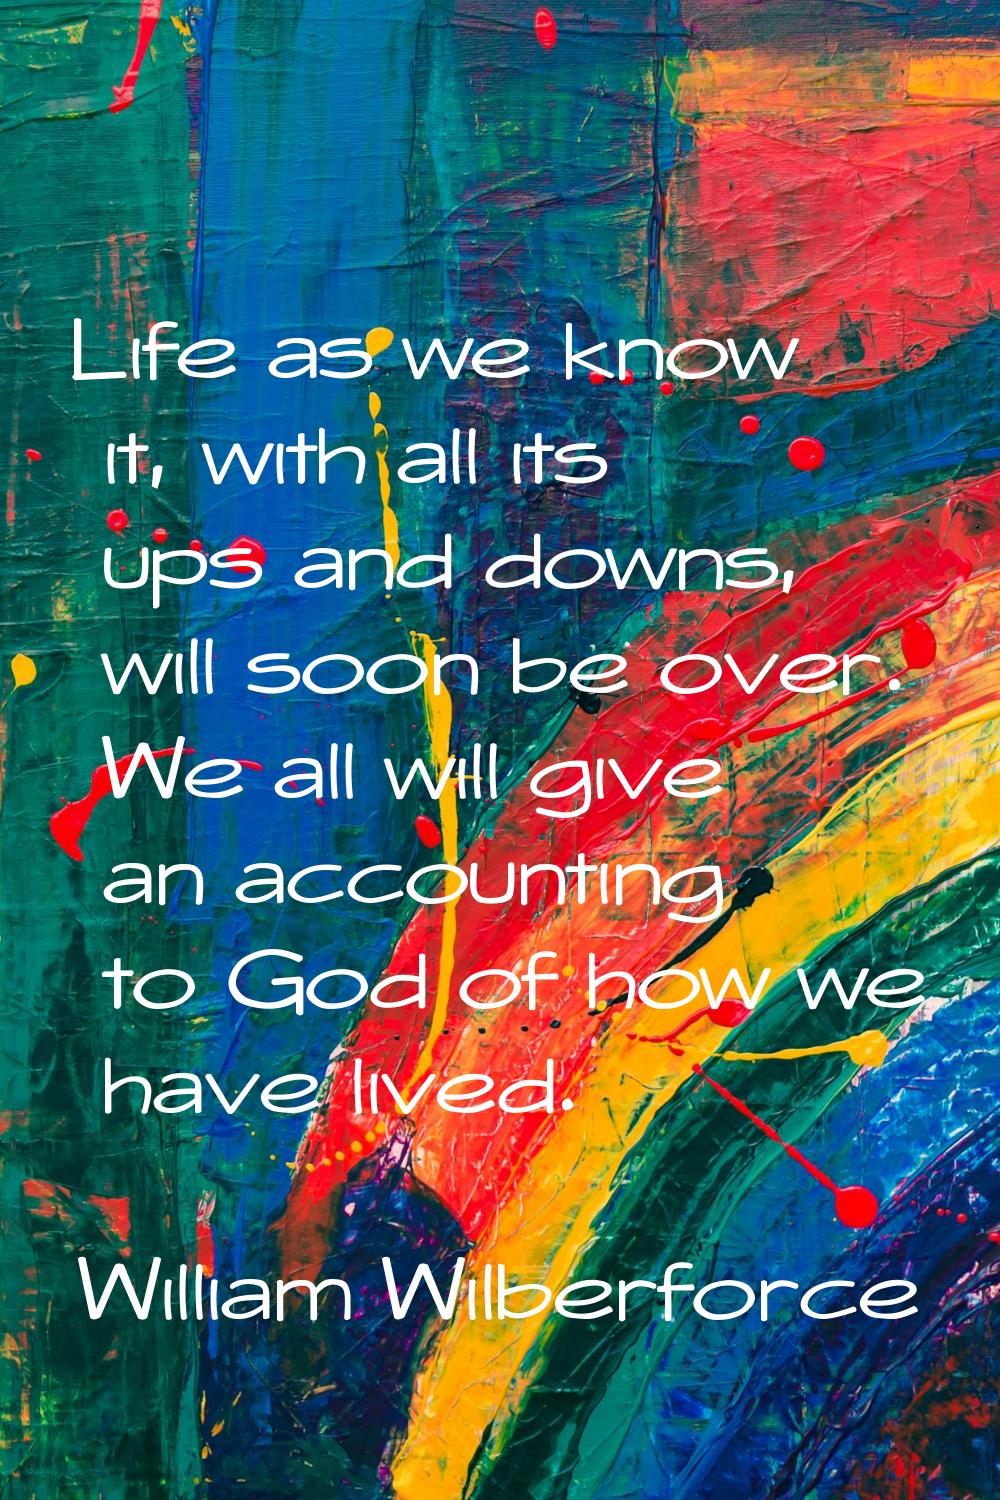 Life as we know it, with all its ups and downs, will soon be over. We all will give an accounting t